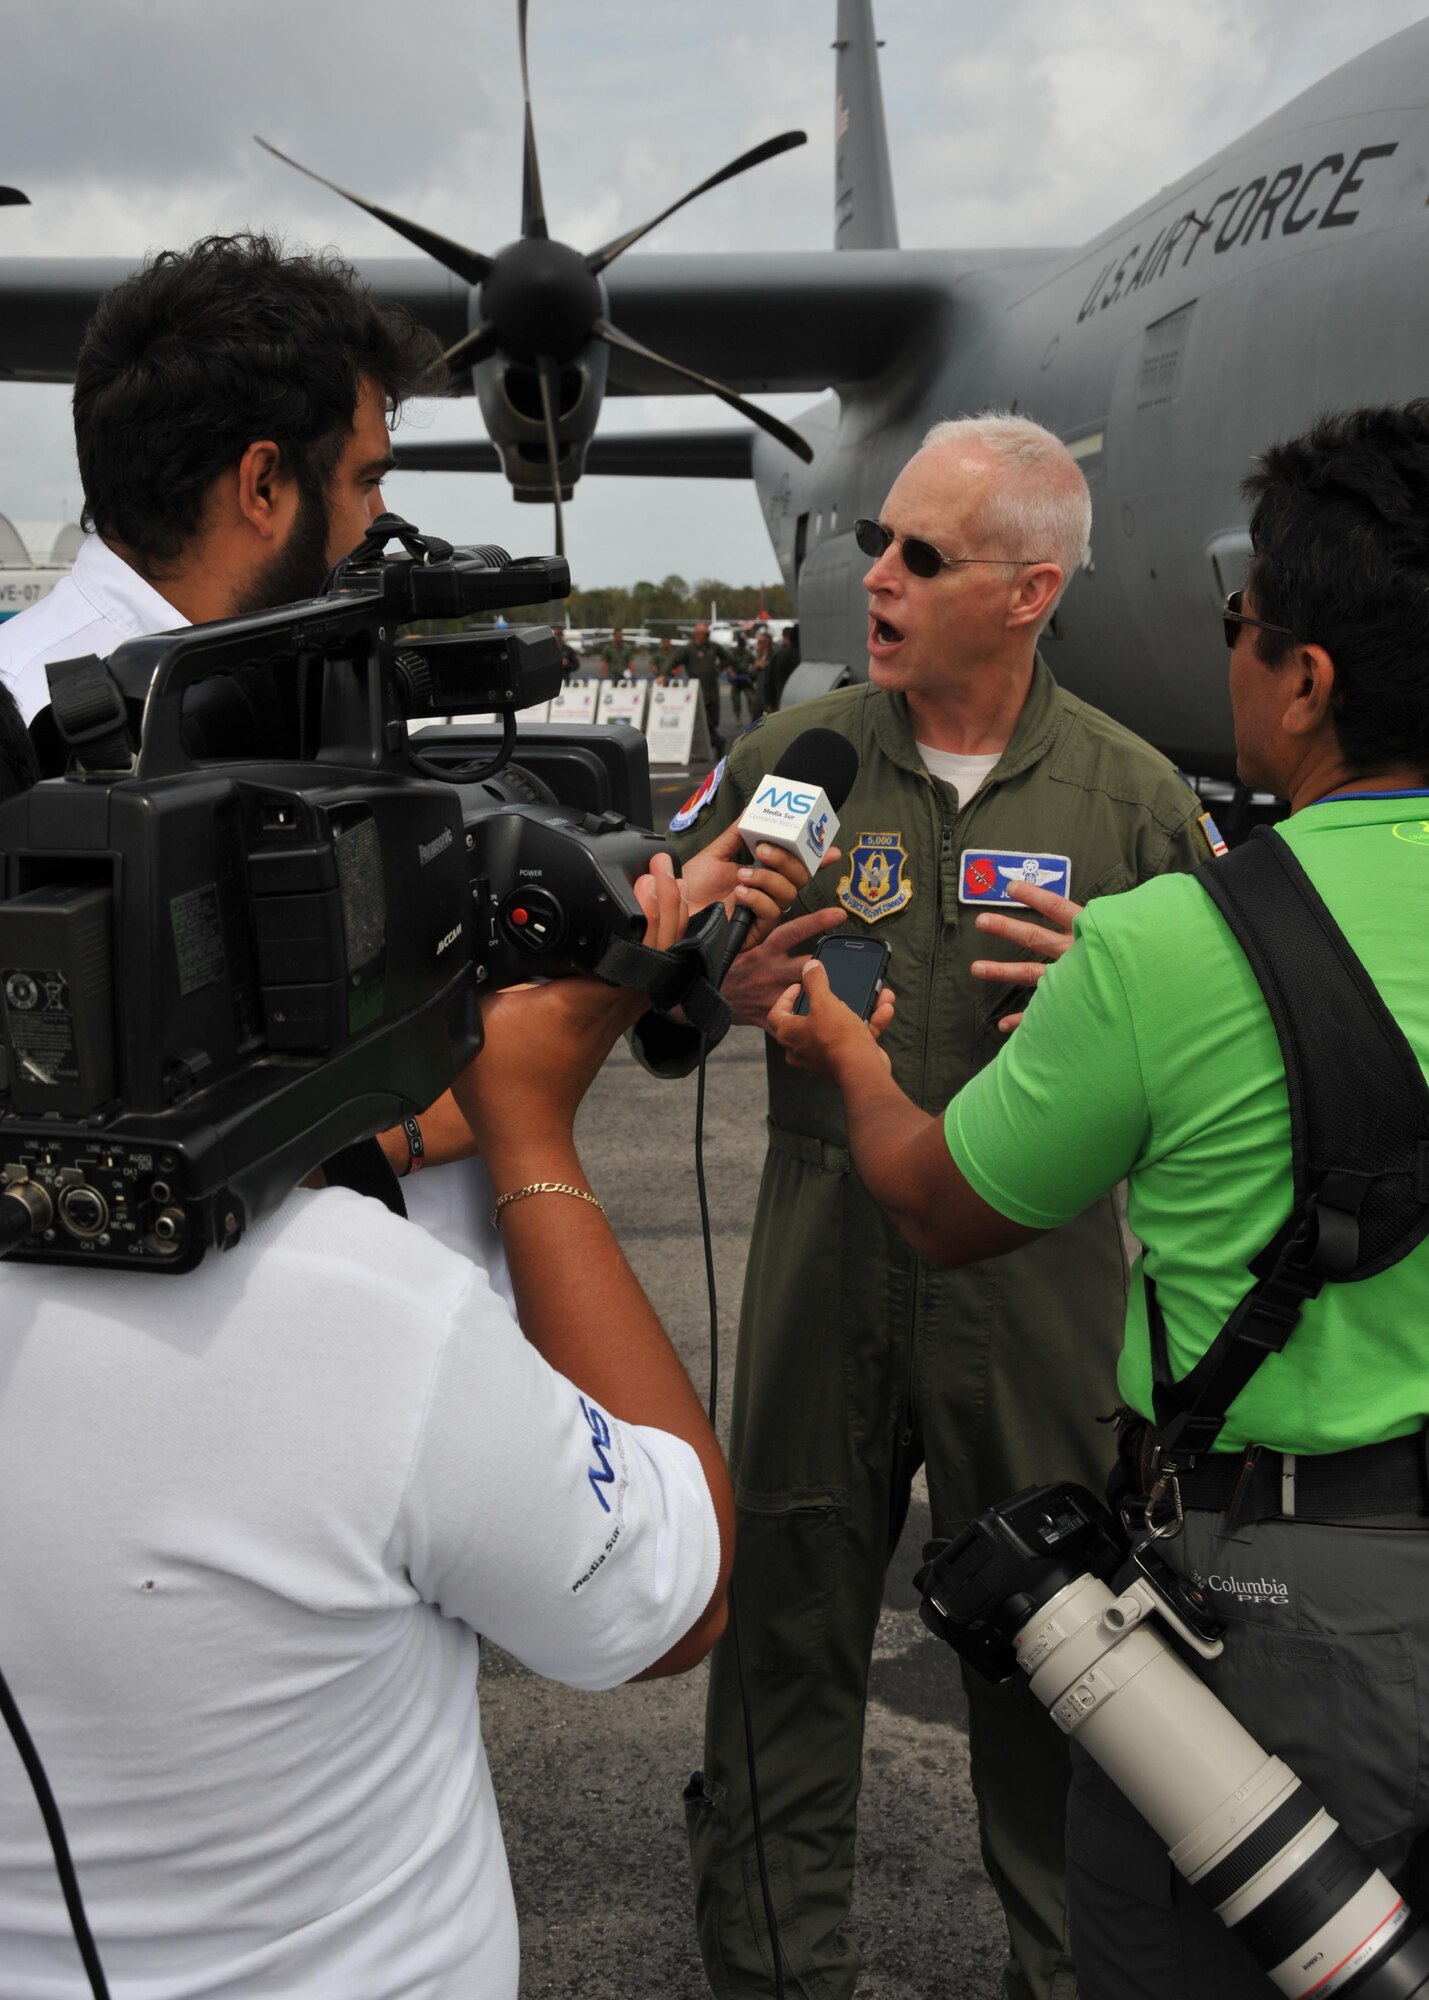 Mexican media interview Lt. Col. Jon Talbot, 53rd Weather Reconnaissance Squadron chief meteorologist, during the Caribbean Hurricane Awareness Tour at Cozumel, Mexico, April 21, 2015. The outreach program, which began in the 1970's and is a joint effort between National Oceanic and Atmospheric Administration's National Hurricane Center and the 403rd Wing's 53rd Weather Reconnaissance Squadron, promotes hurricane awareness and preparedness throughout the Caribbean region. (U.S. Air Force photo/Maj. Marnee A.C. Losurdo)